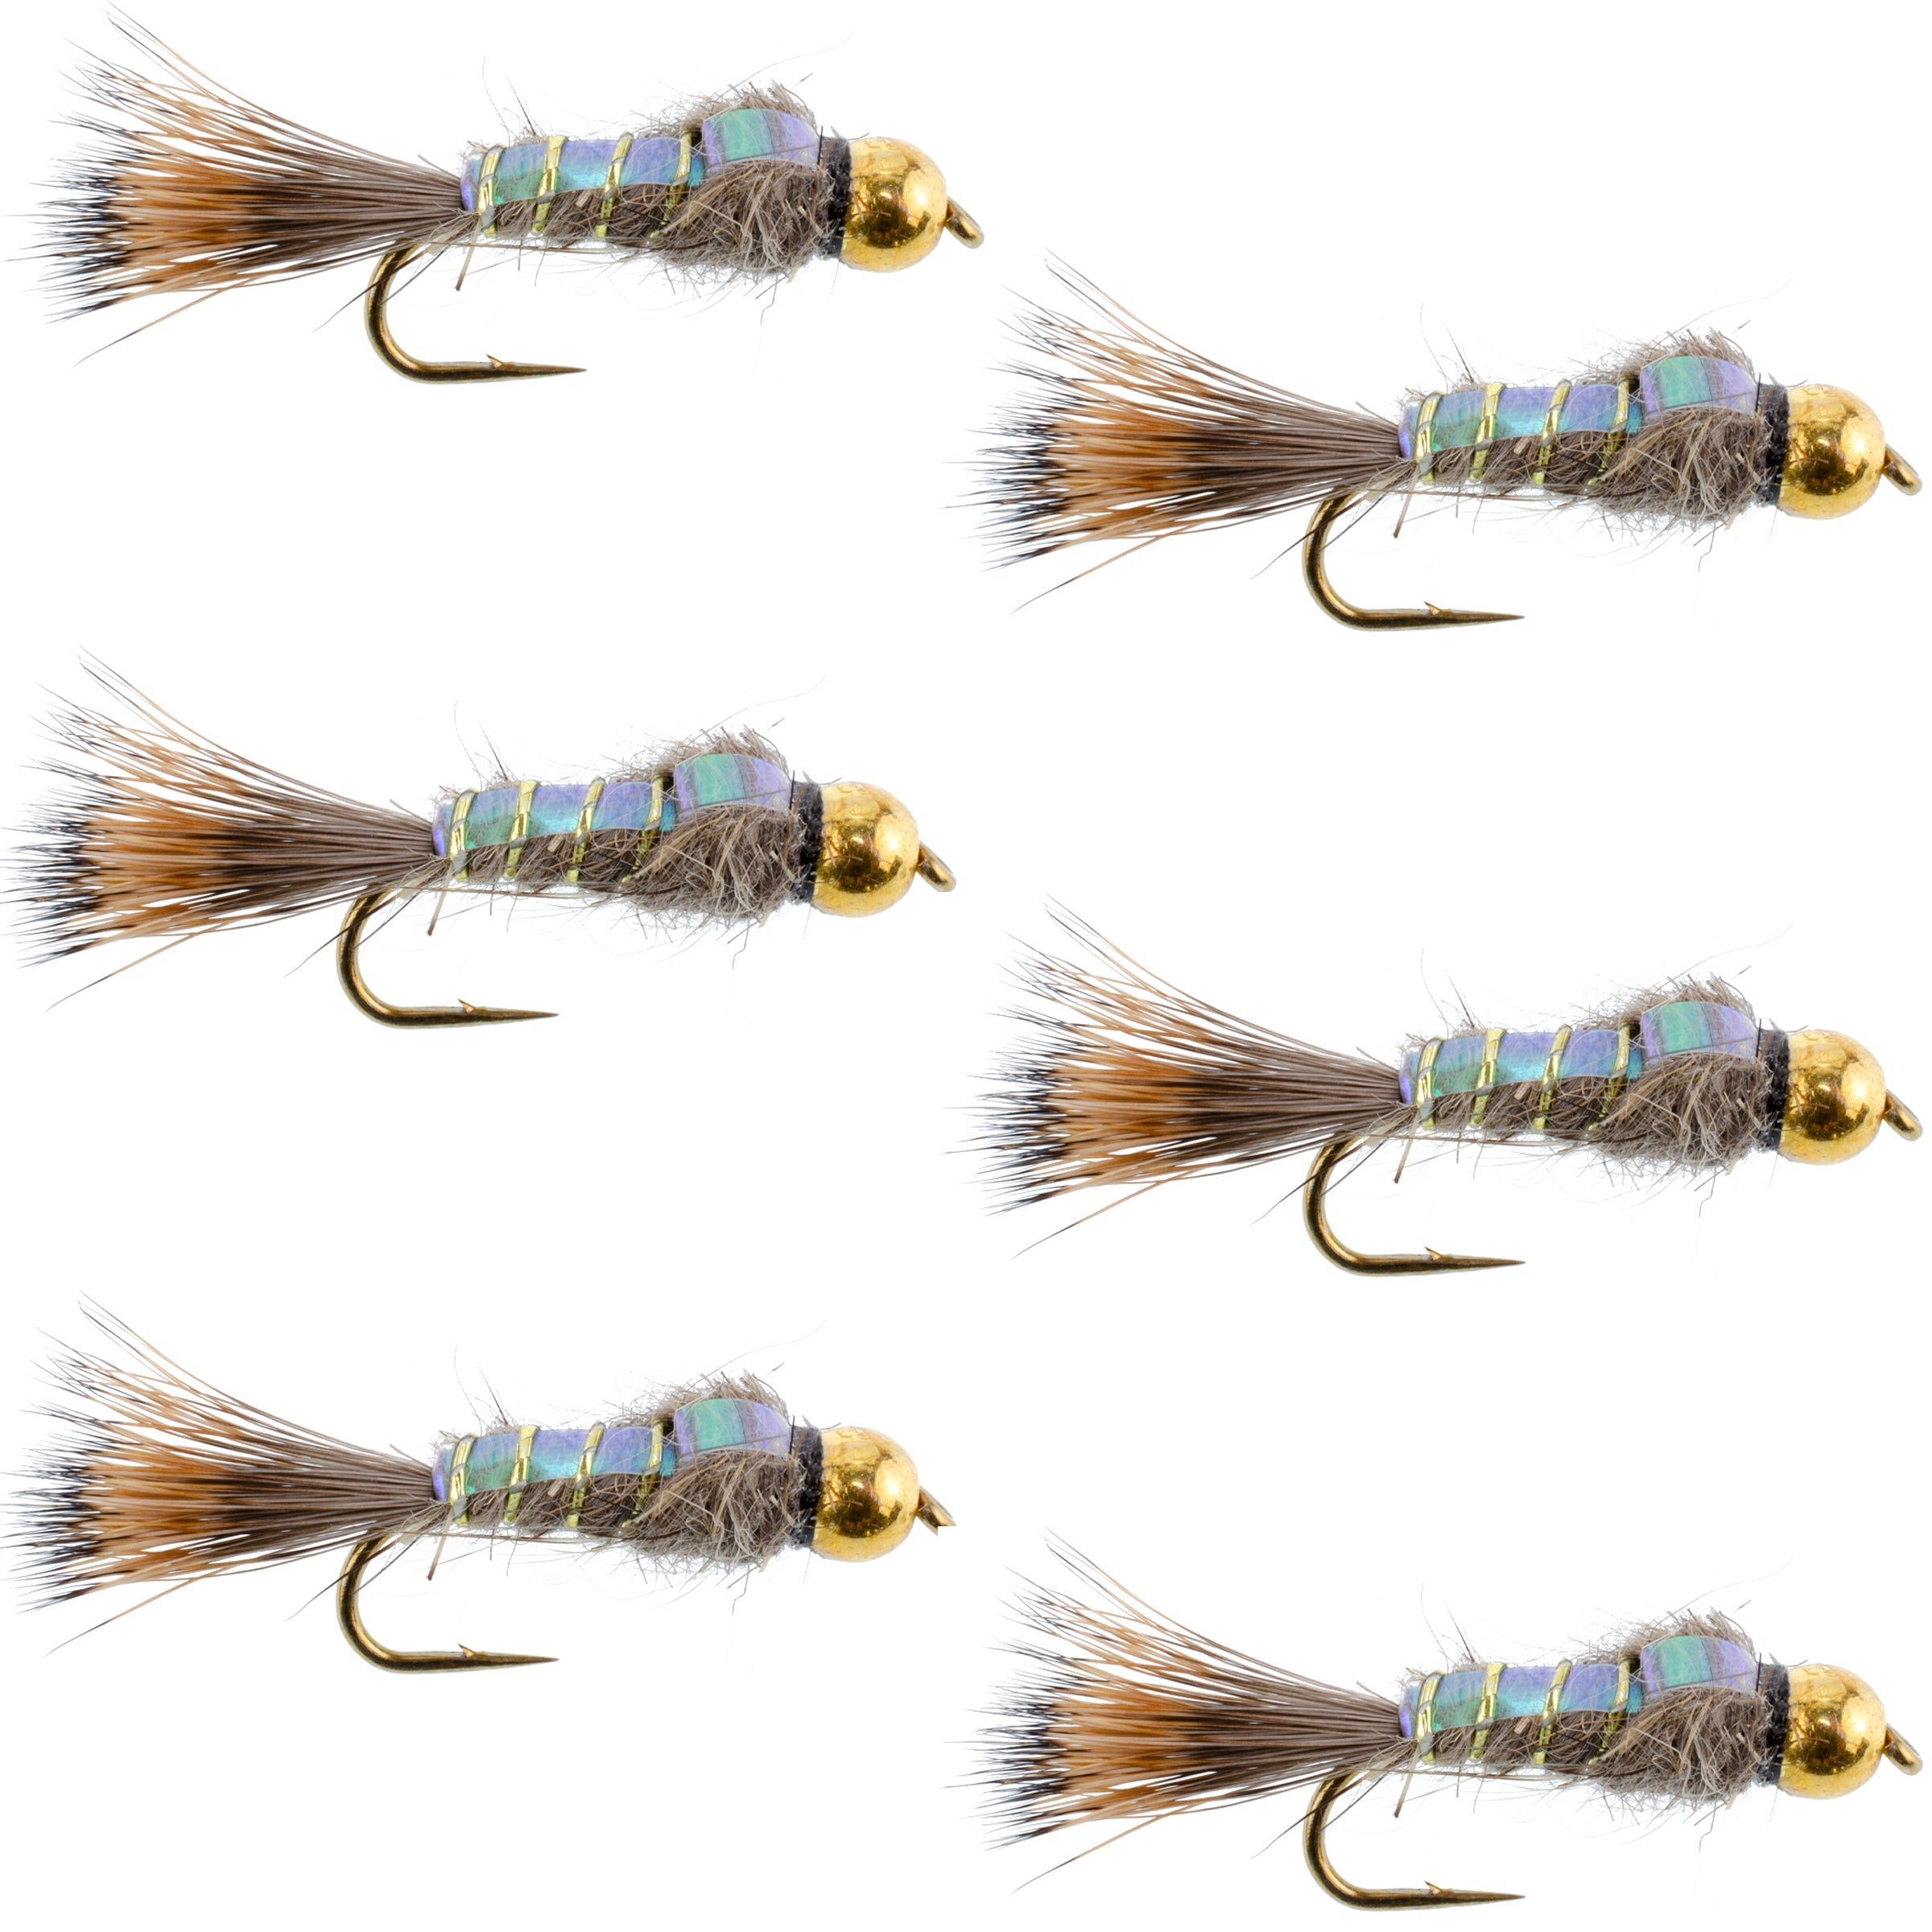 Tungsten Bead Head Nymph Fly Fishing Flies - Flashback Gold Ribbed Hare's Ear Trout Fly - Nymph Wet Fly - 6 Flies Hook Size 16